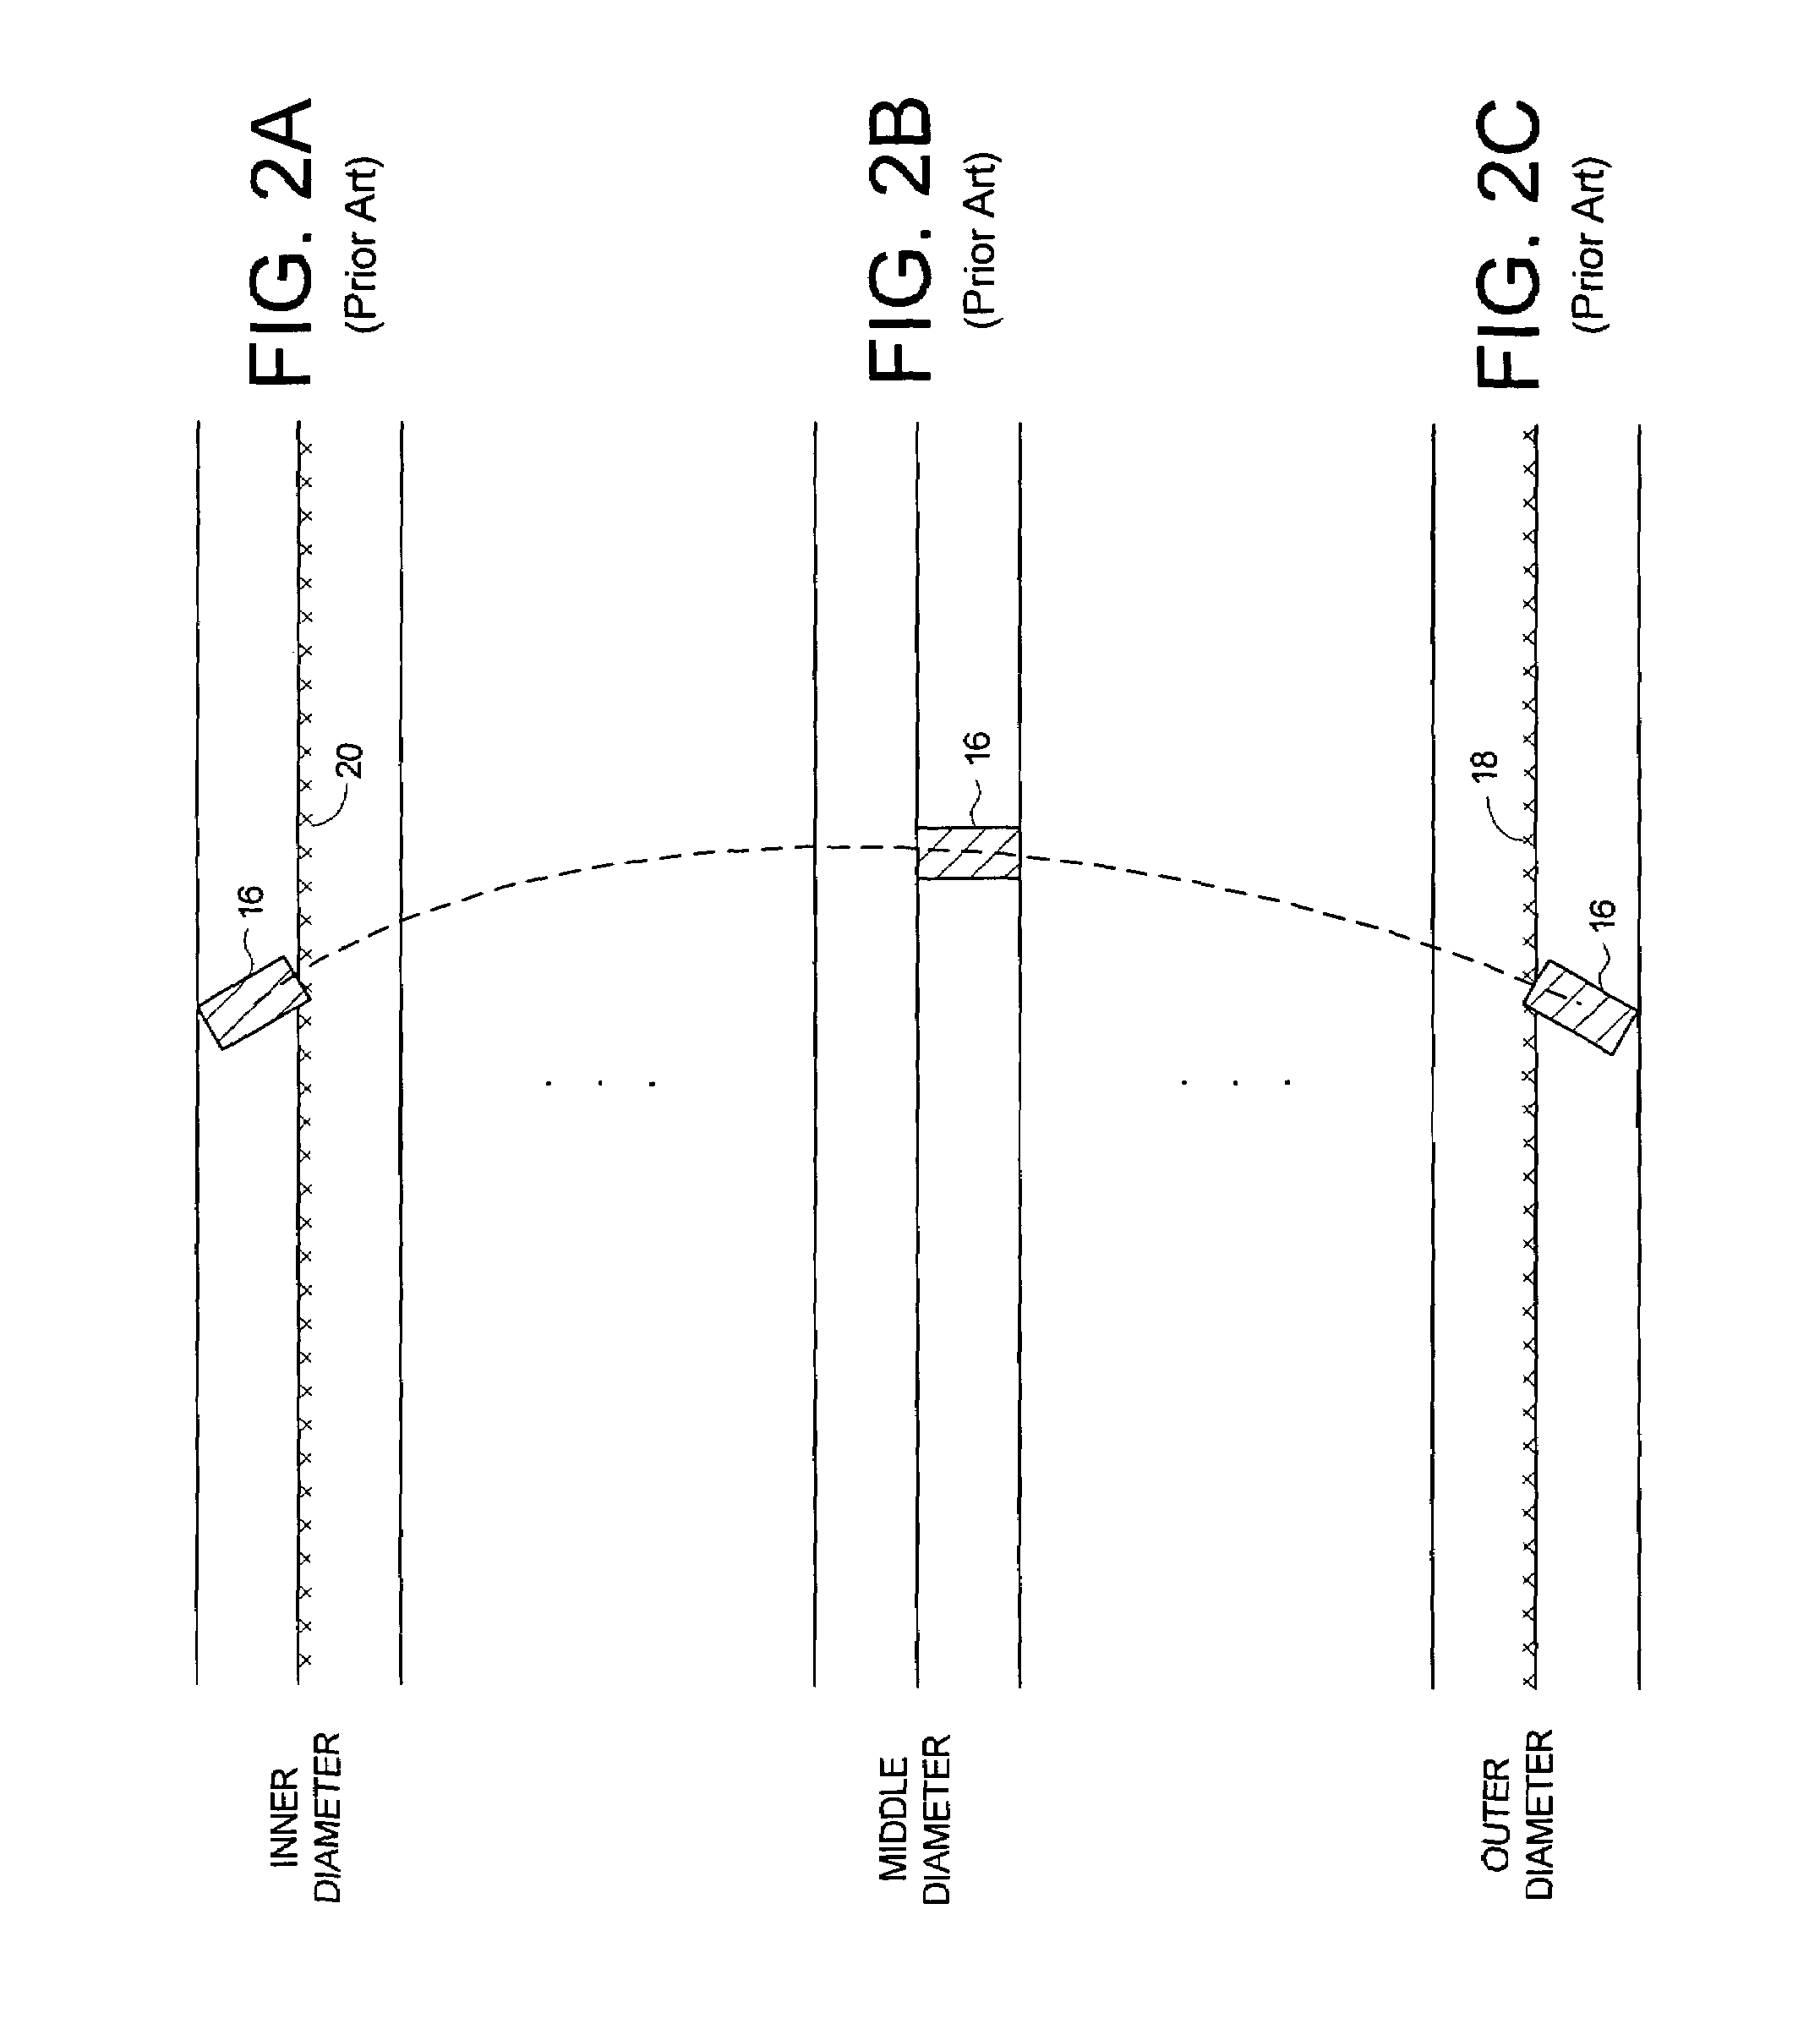 Servo writing a disk drive using a secondary actuator to control skew angle